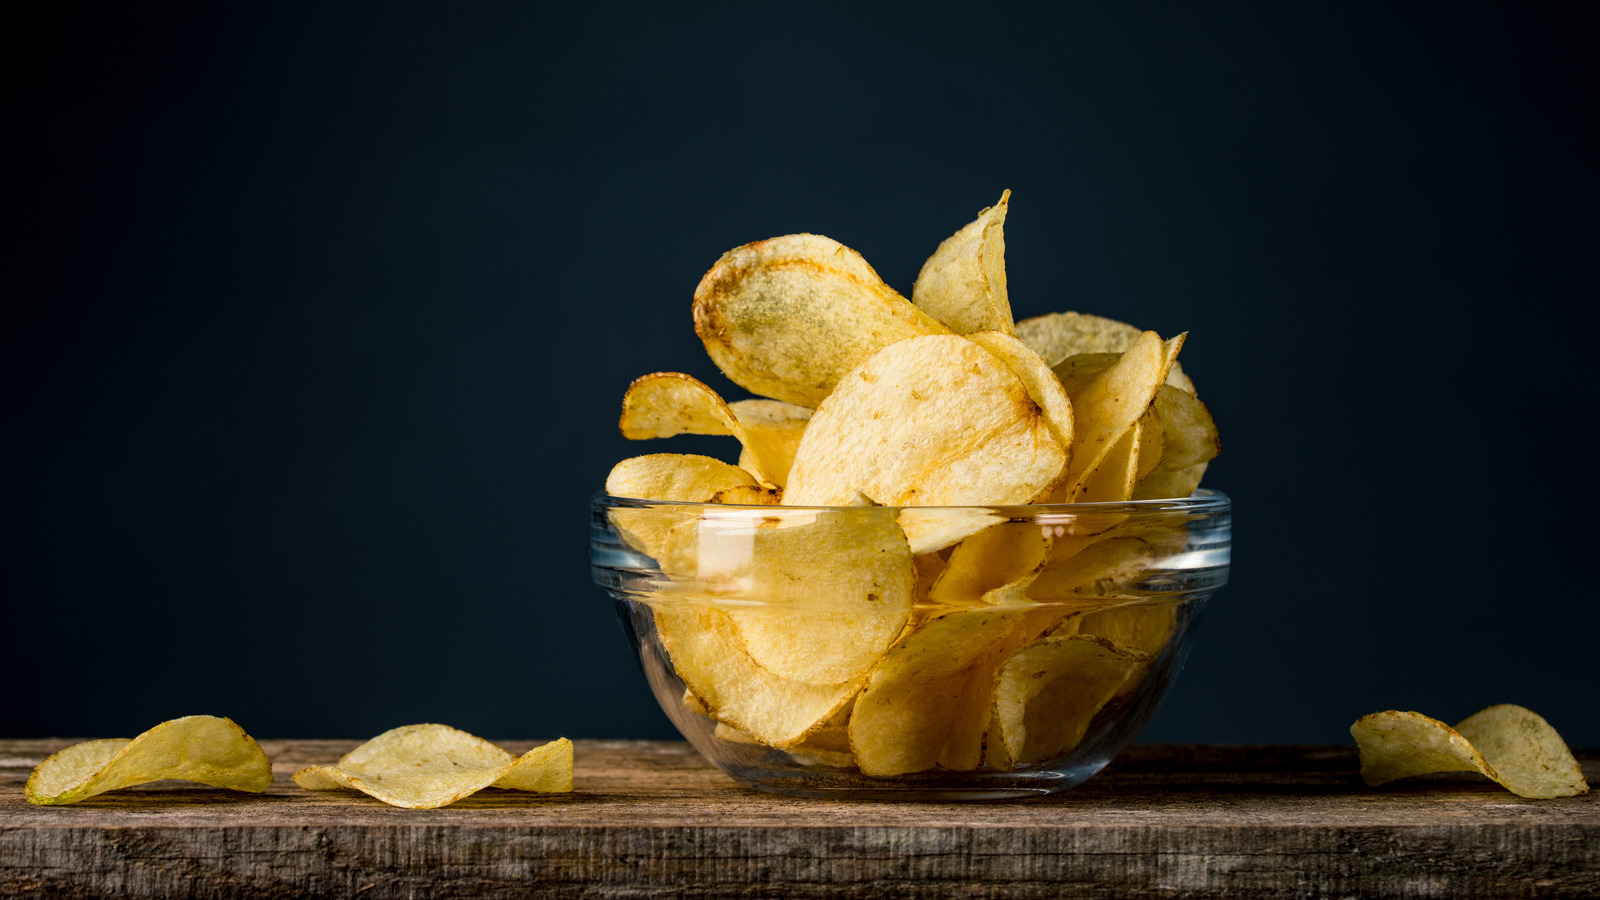 Kettle Chips Vs. Regular Chips: What's The Nutritional Difference?